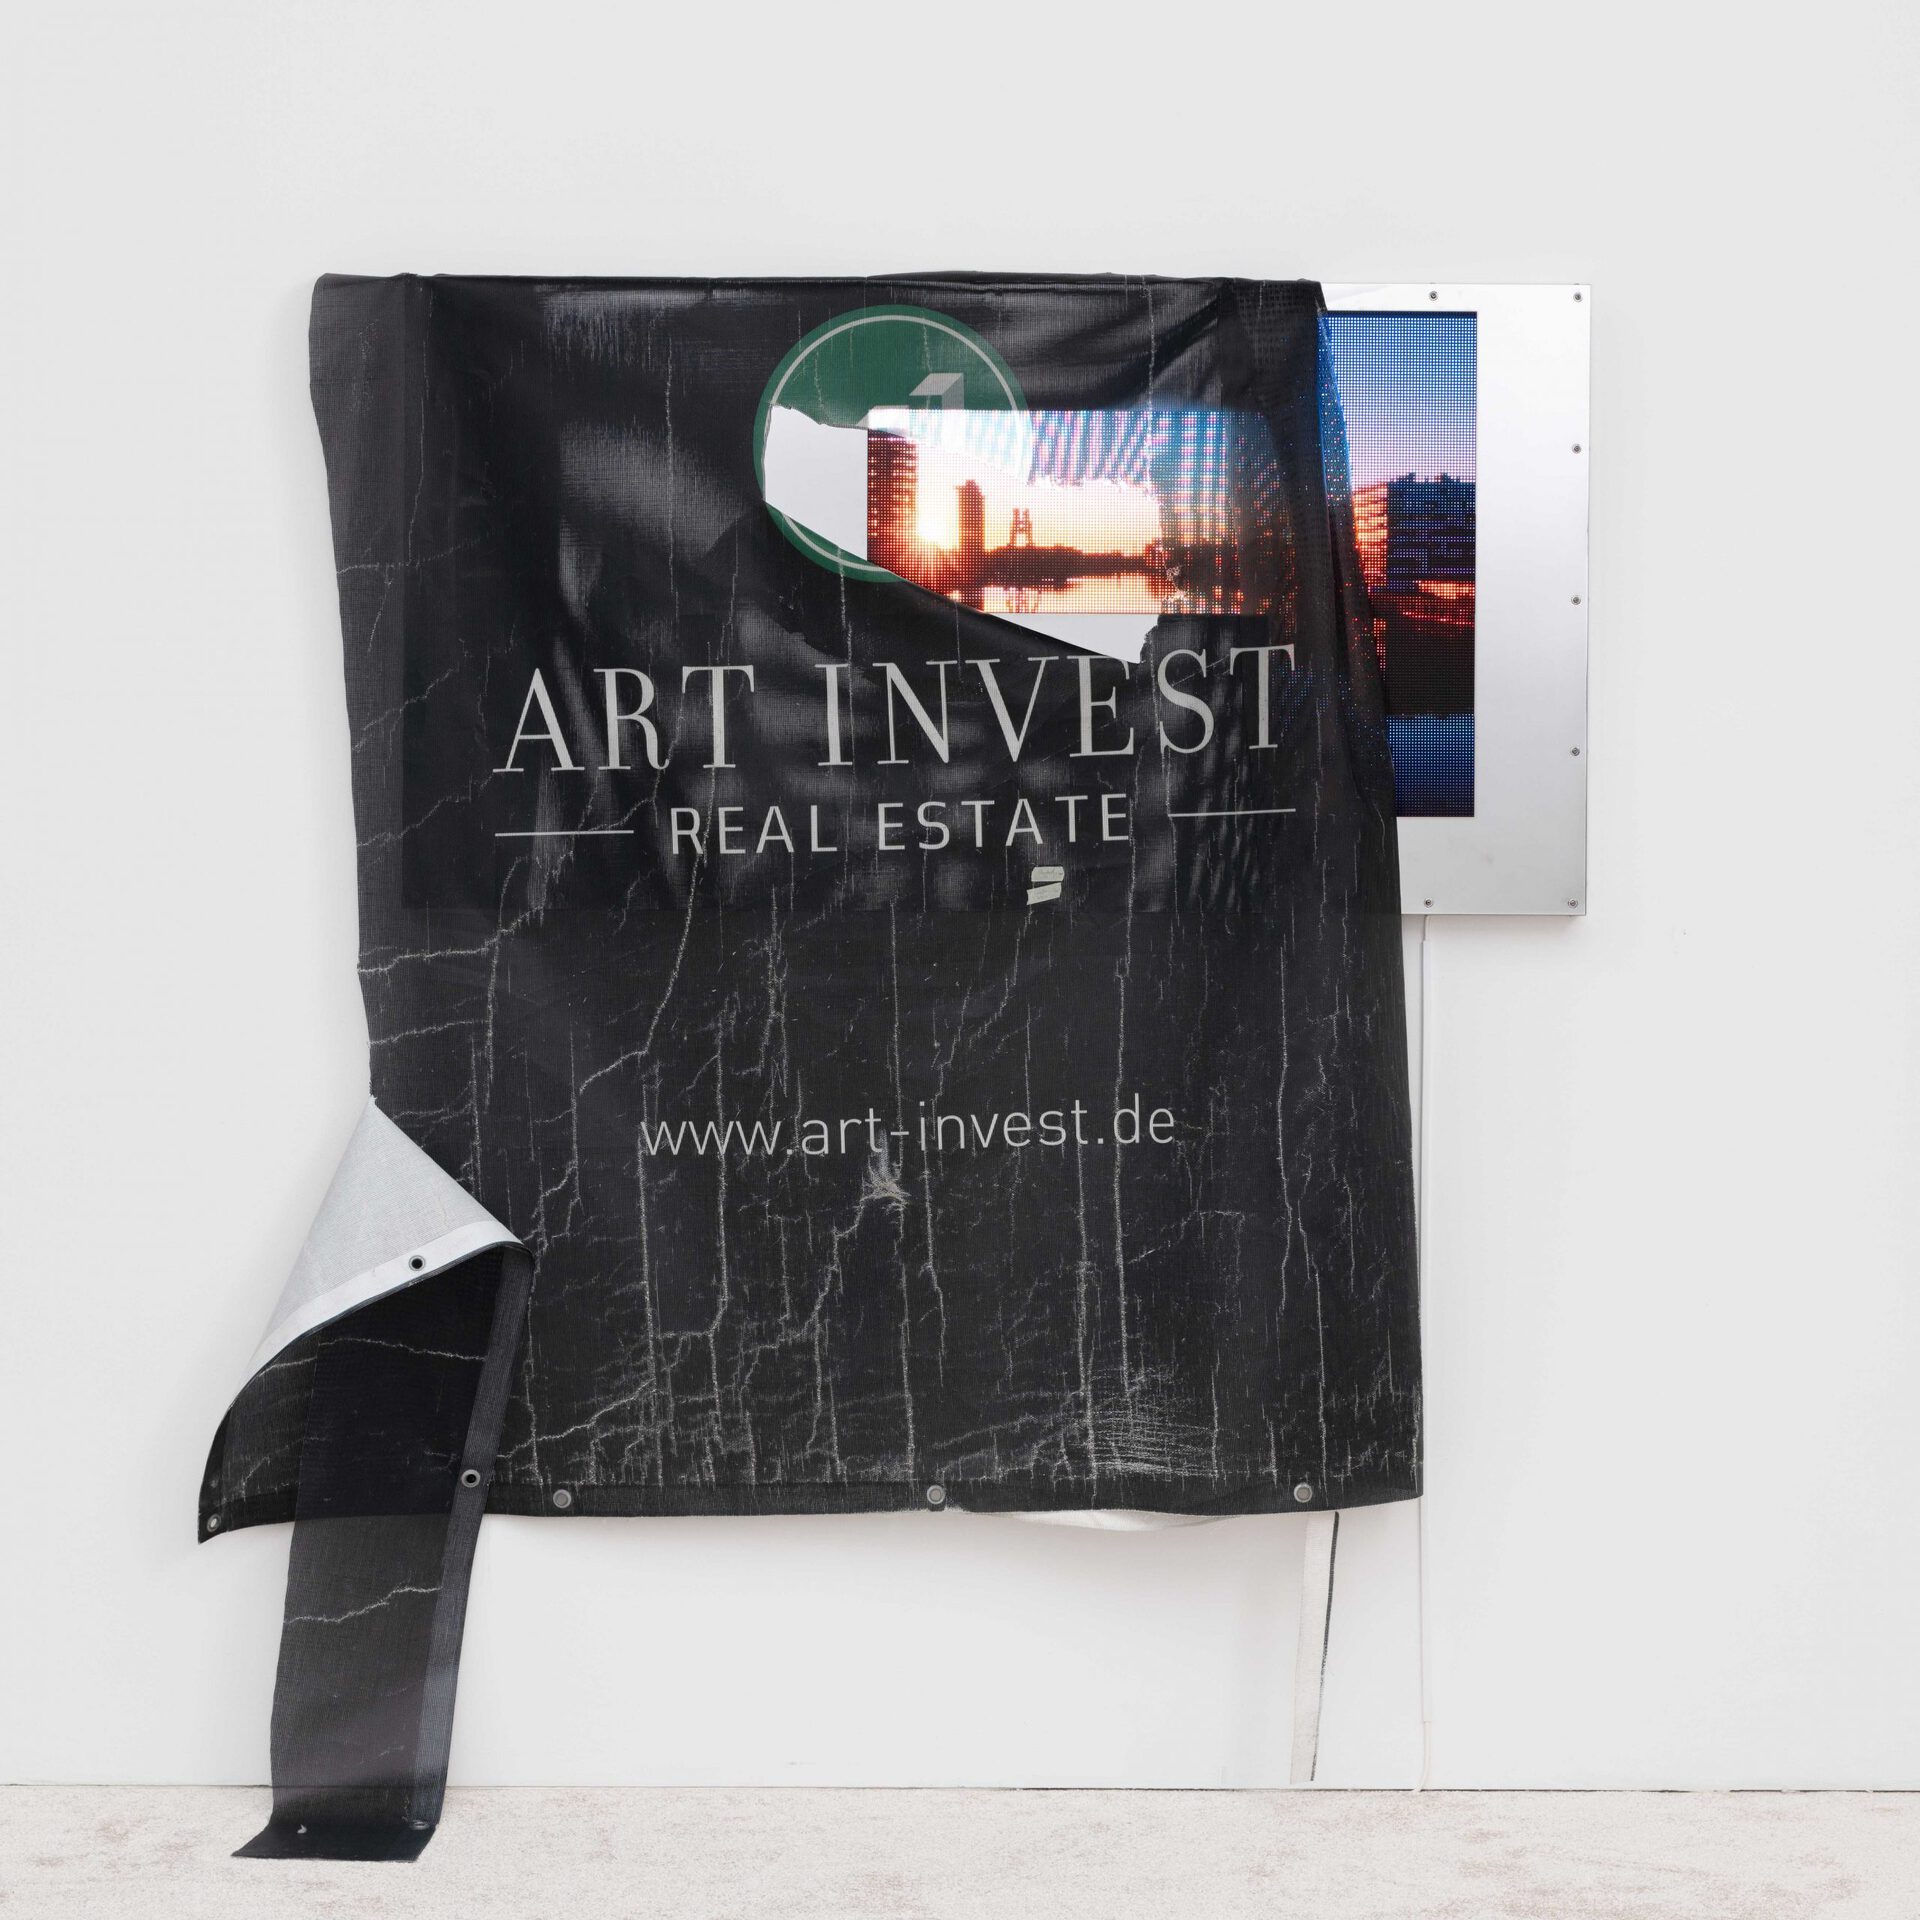 Mathis Altmann, Gold Rush out West, 2021, LED matrix screen, video loop 3.40 min., stainless steel mirror, found construction site banner, 158 x 152 x 15 cm